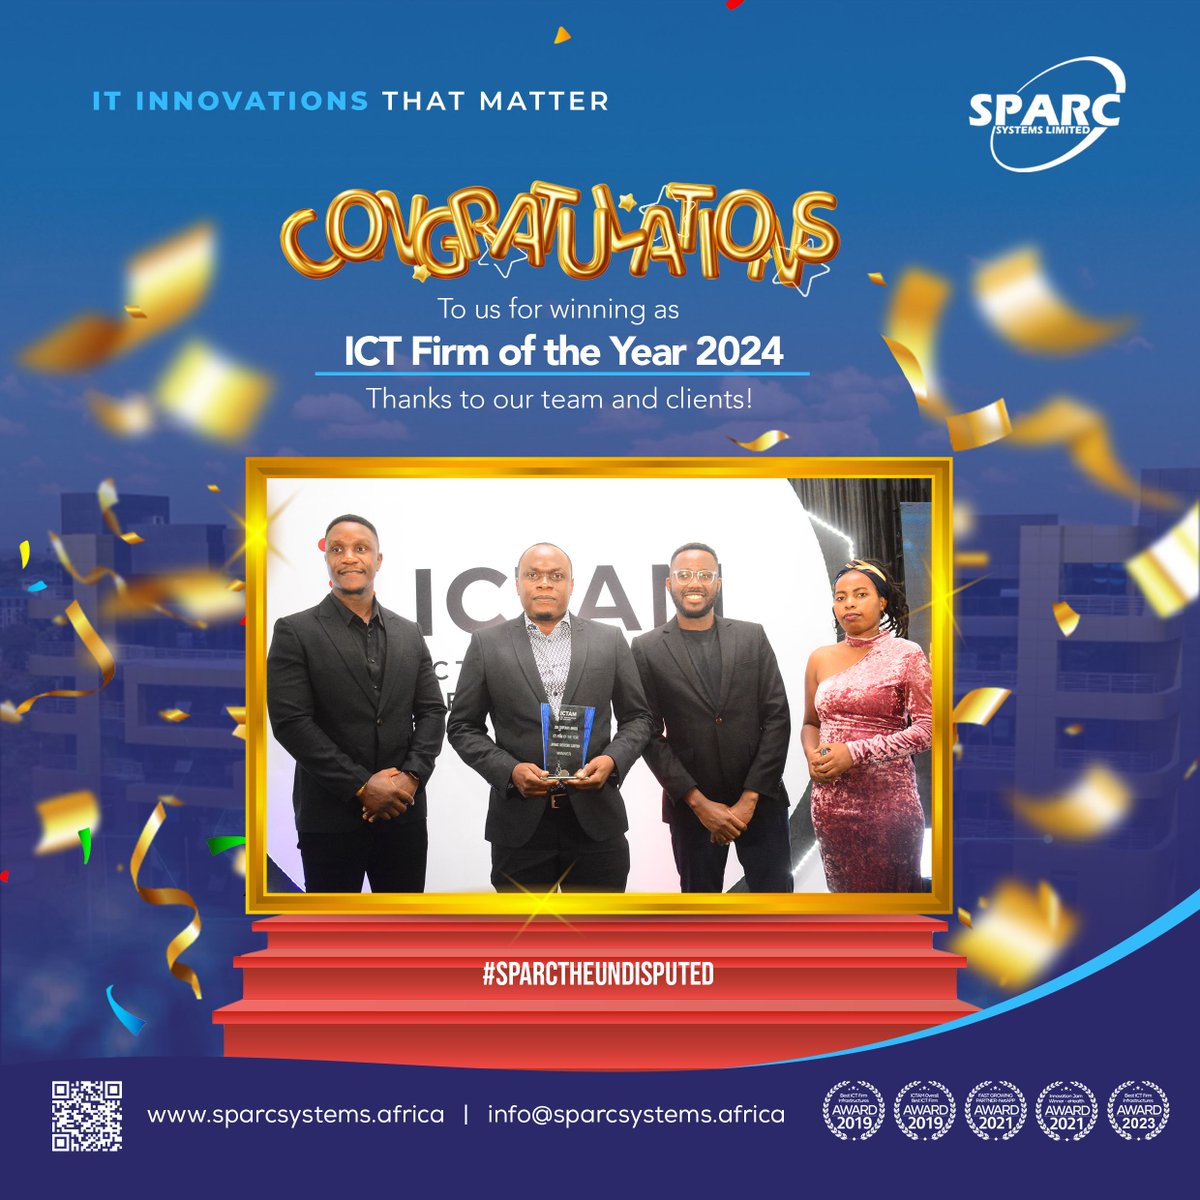 Did you know? SPARC Systems Ltd is a 3-time winner of ICT Firm of the Year in Malawi, leading ICT in Africa! Our solutions reach 11+ countries, power 80% of Malawi's banks & telcos, and innovate with 7 software solutions, including Mental Lab! #SPARCTheUndisputed #ITCompanyAfrica